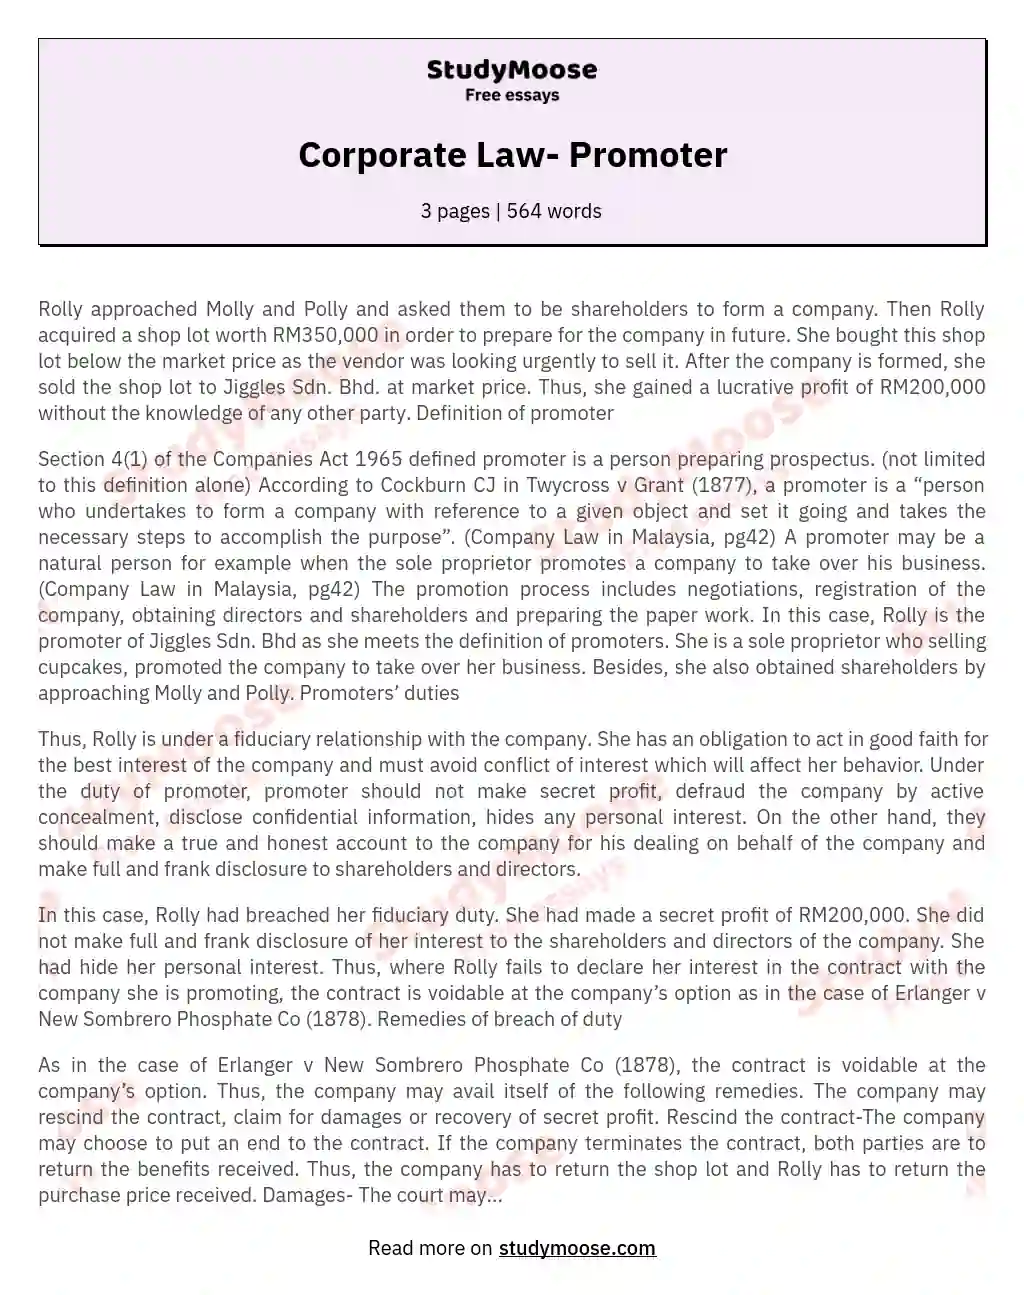 Corporate Law- Promoter essay